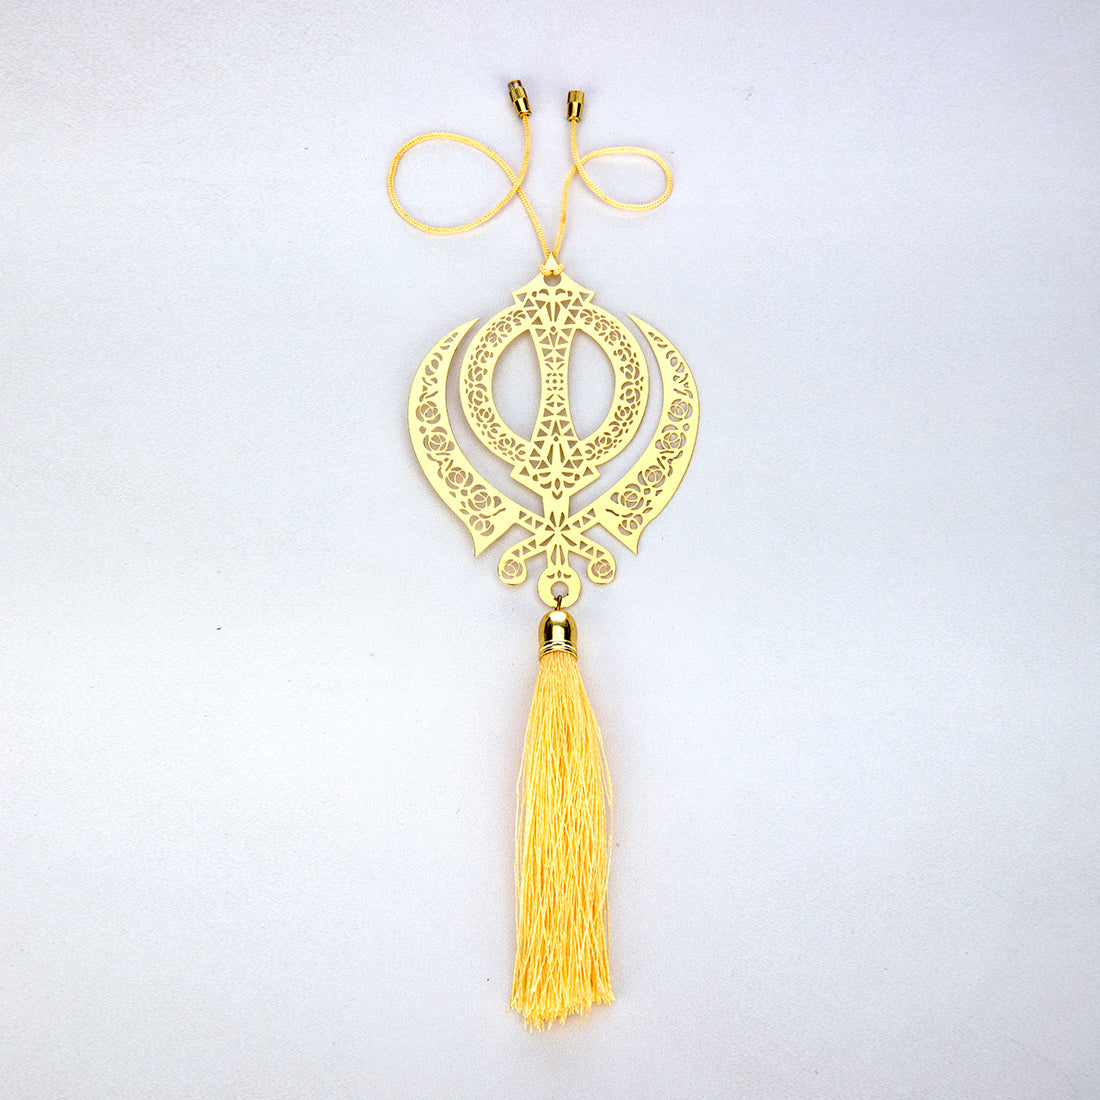 Khanda Punjabi Sikh Hanging Accessories for Car rear view mirror Décor in Brass